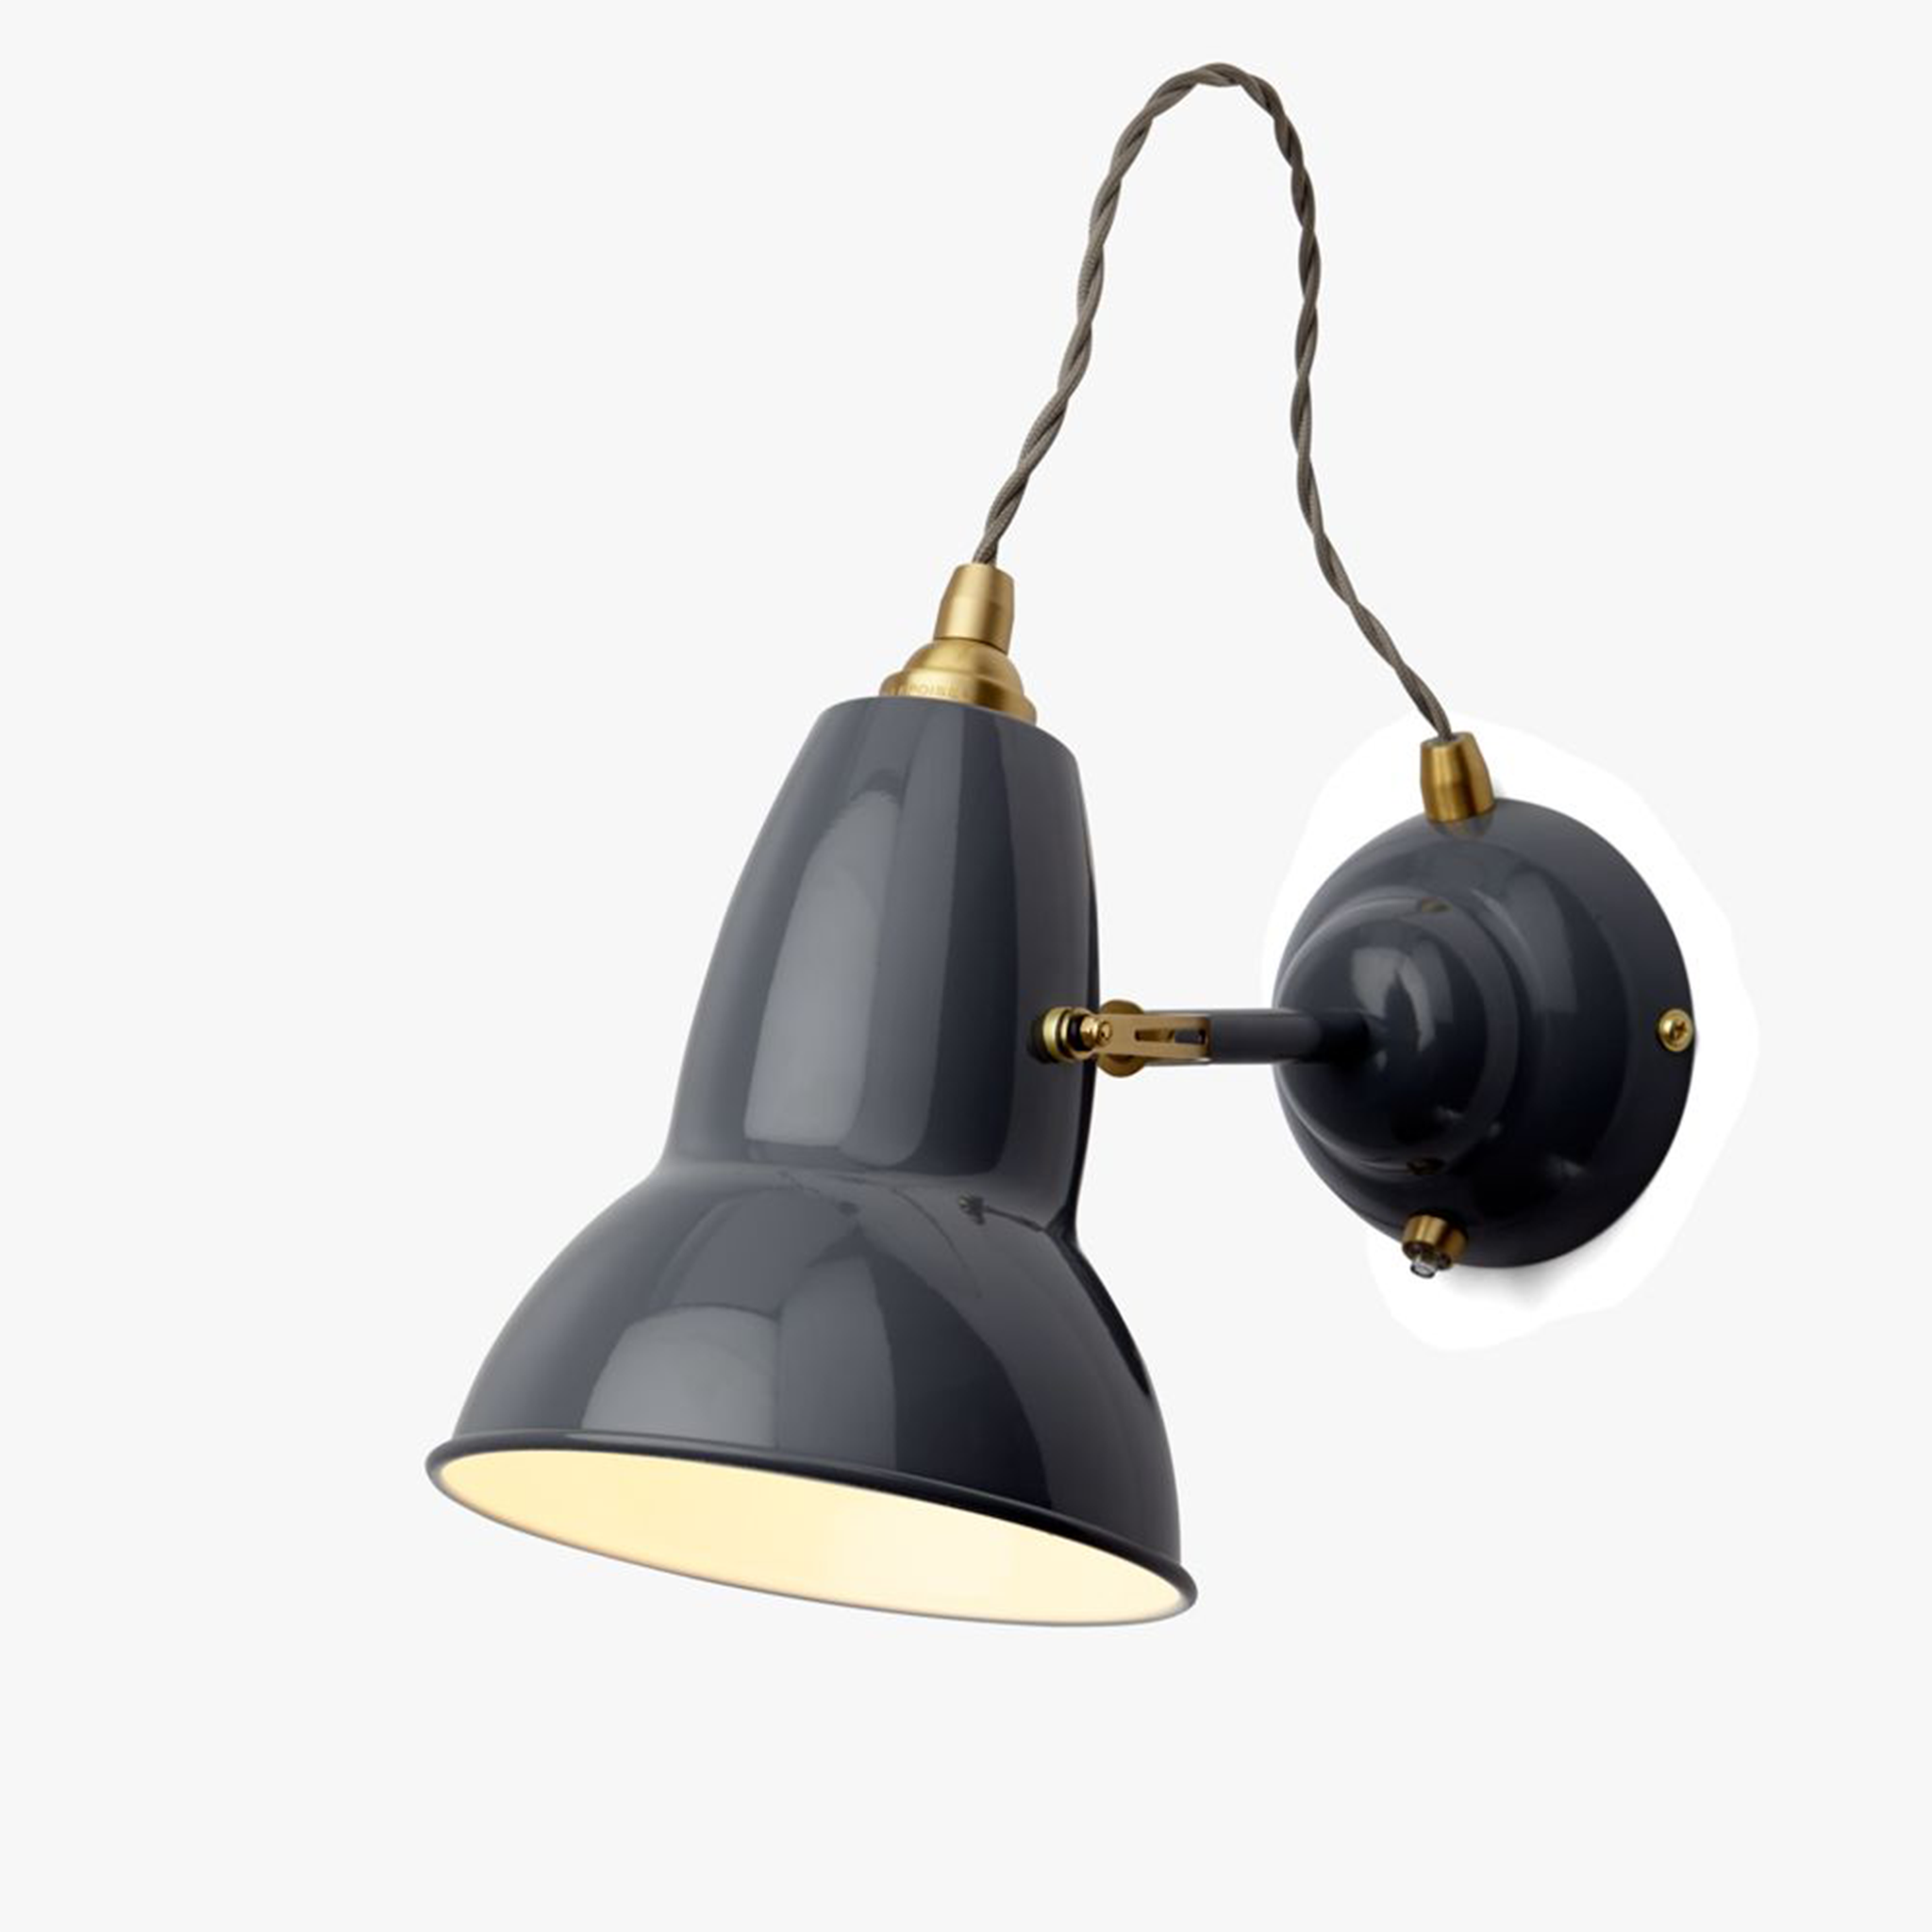 Original 1227 Brass Wall Light by Anglepoise